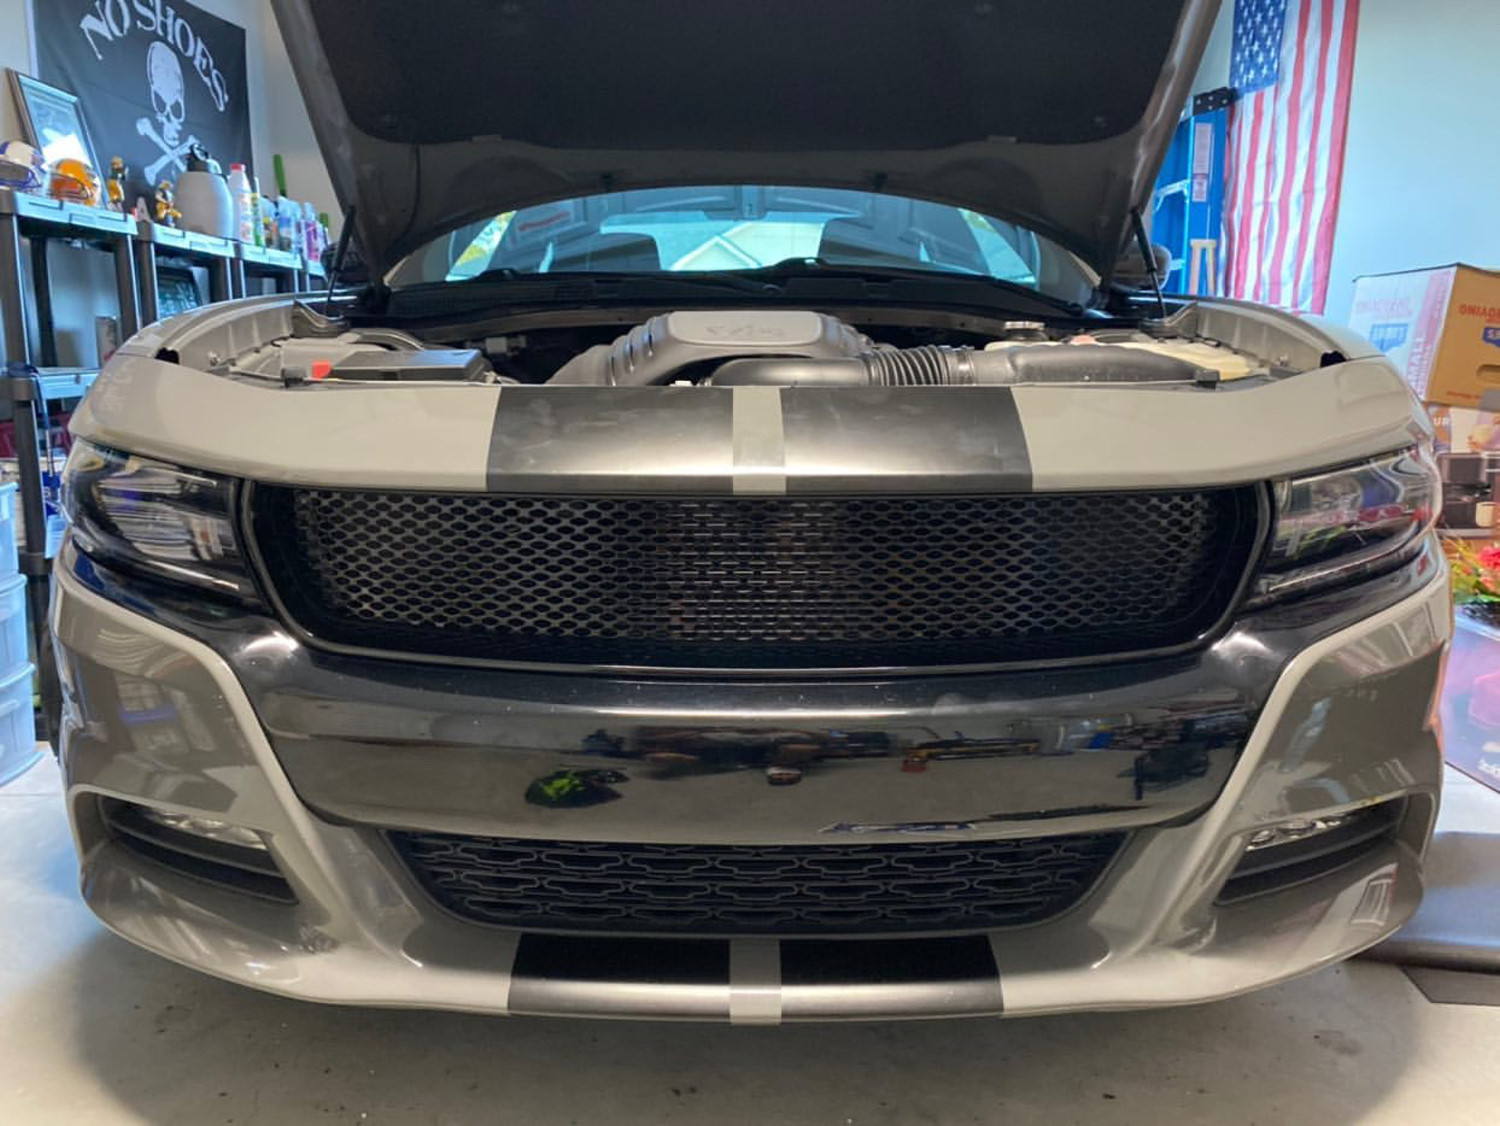 Sleek and Mean: Upgraded Grille for Dodge Charger with Removed Crosshair